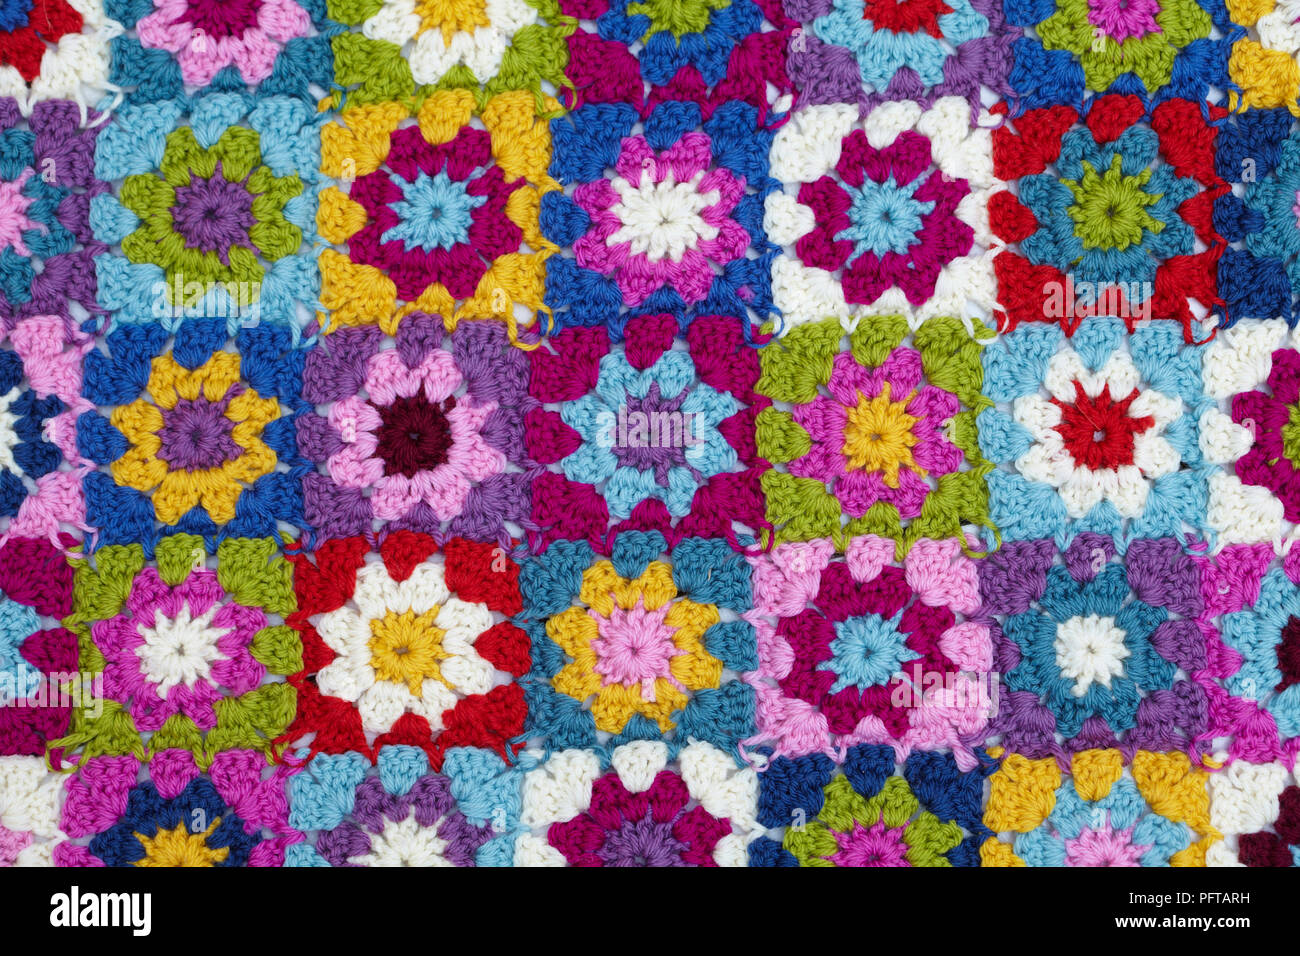 Granny square blanket with flowers Stock Photo